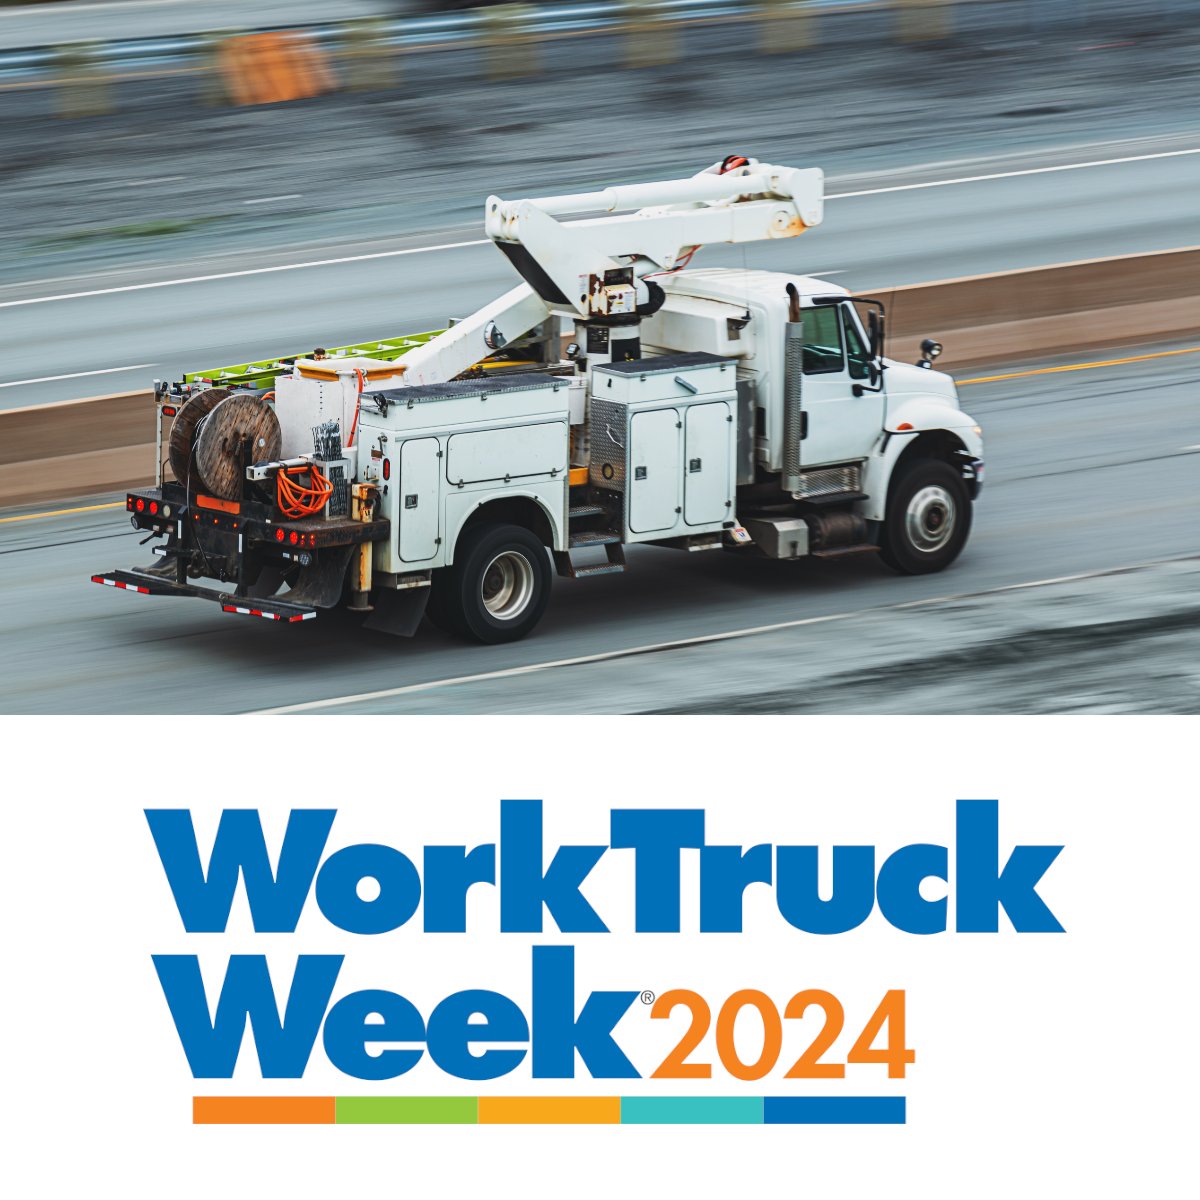 The CPQ team will be attending the Work Truck Week Show (WTW) in Indianapolis, IN, March 6-8. Learn how E-One, ATC and Hendrickson have improved their quote to order process. Book time with our team at the show bit.ly/4a7r9J1 #cincom #cpq #worktruckweek #wtw24